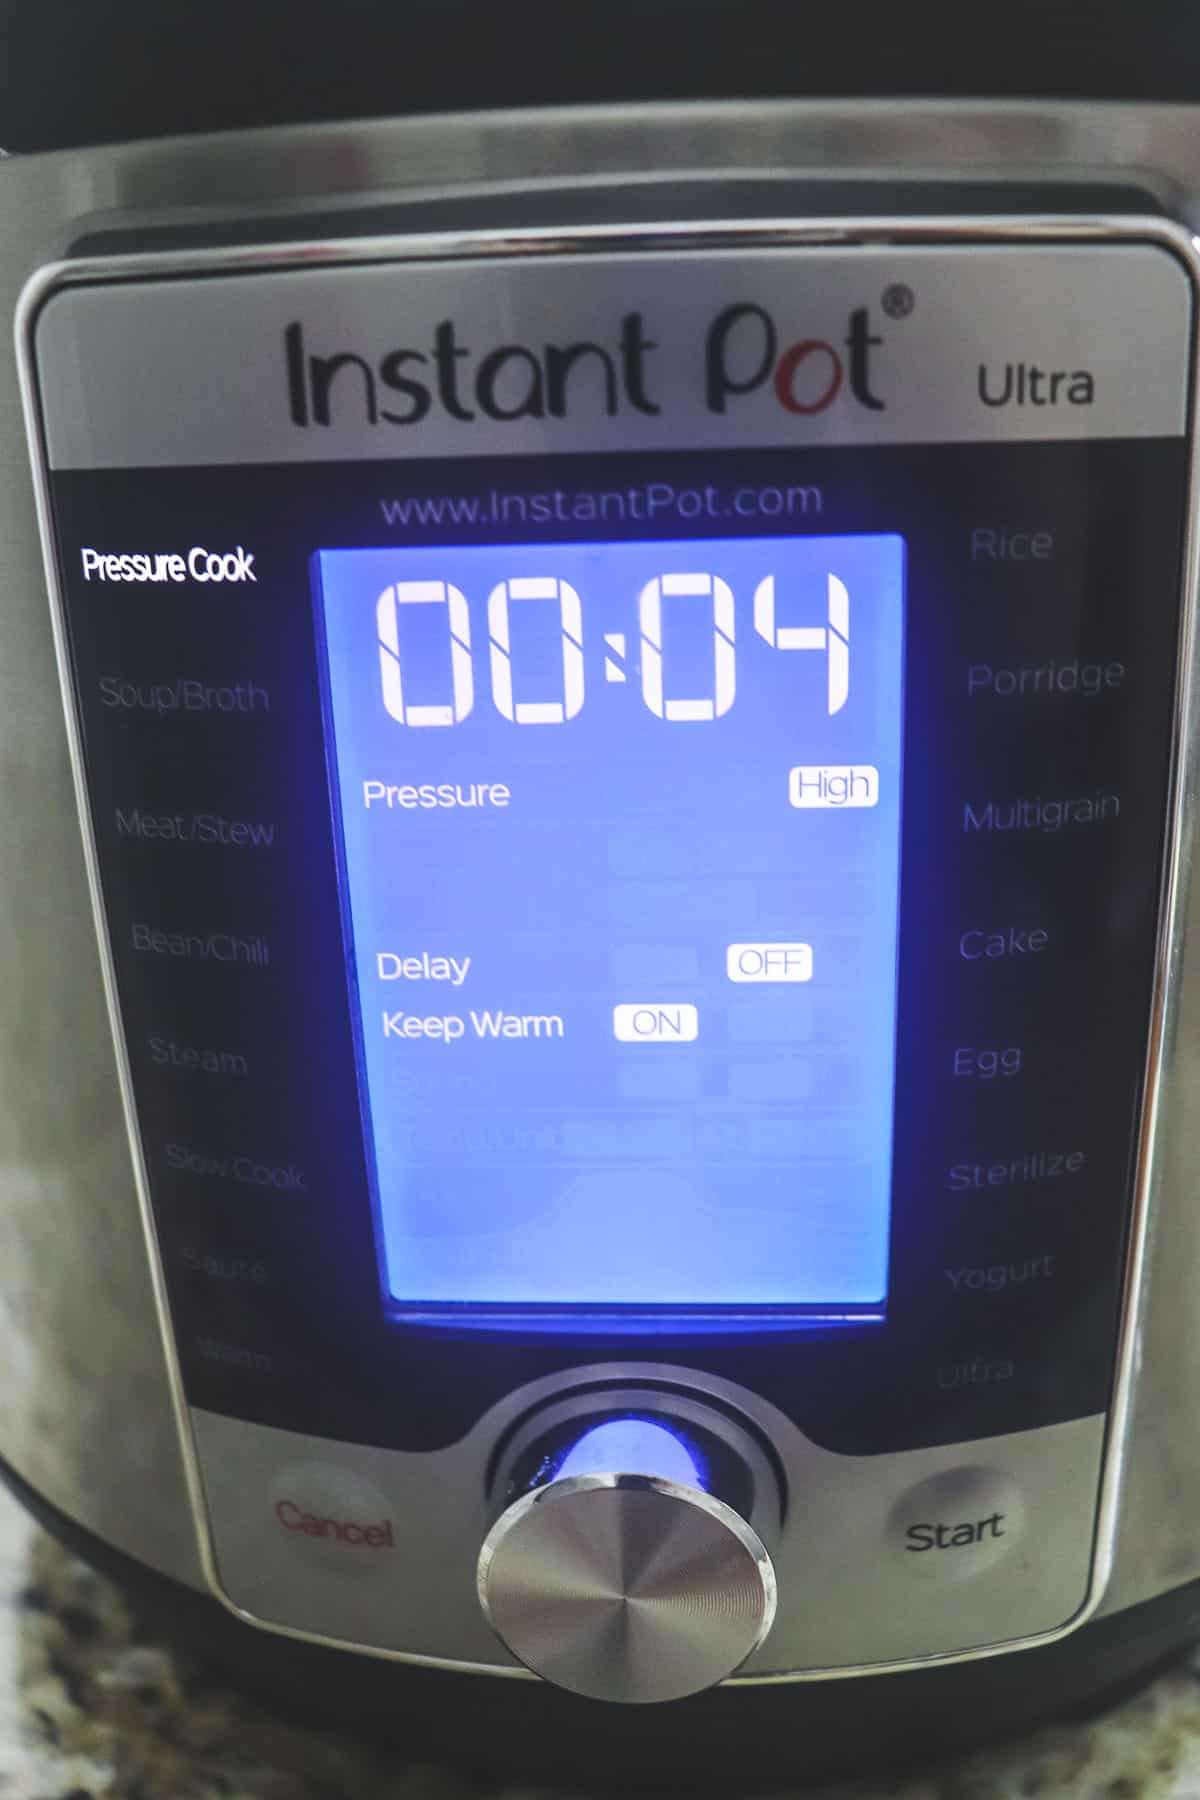 instant pot ultra set to 4 minute cook time